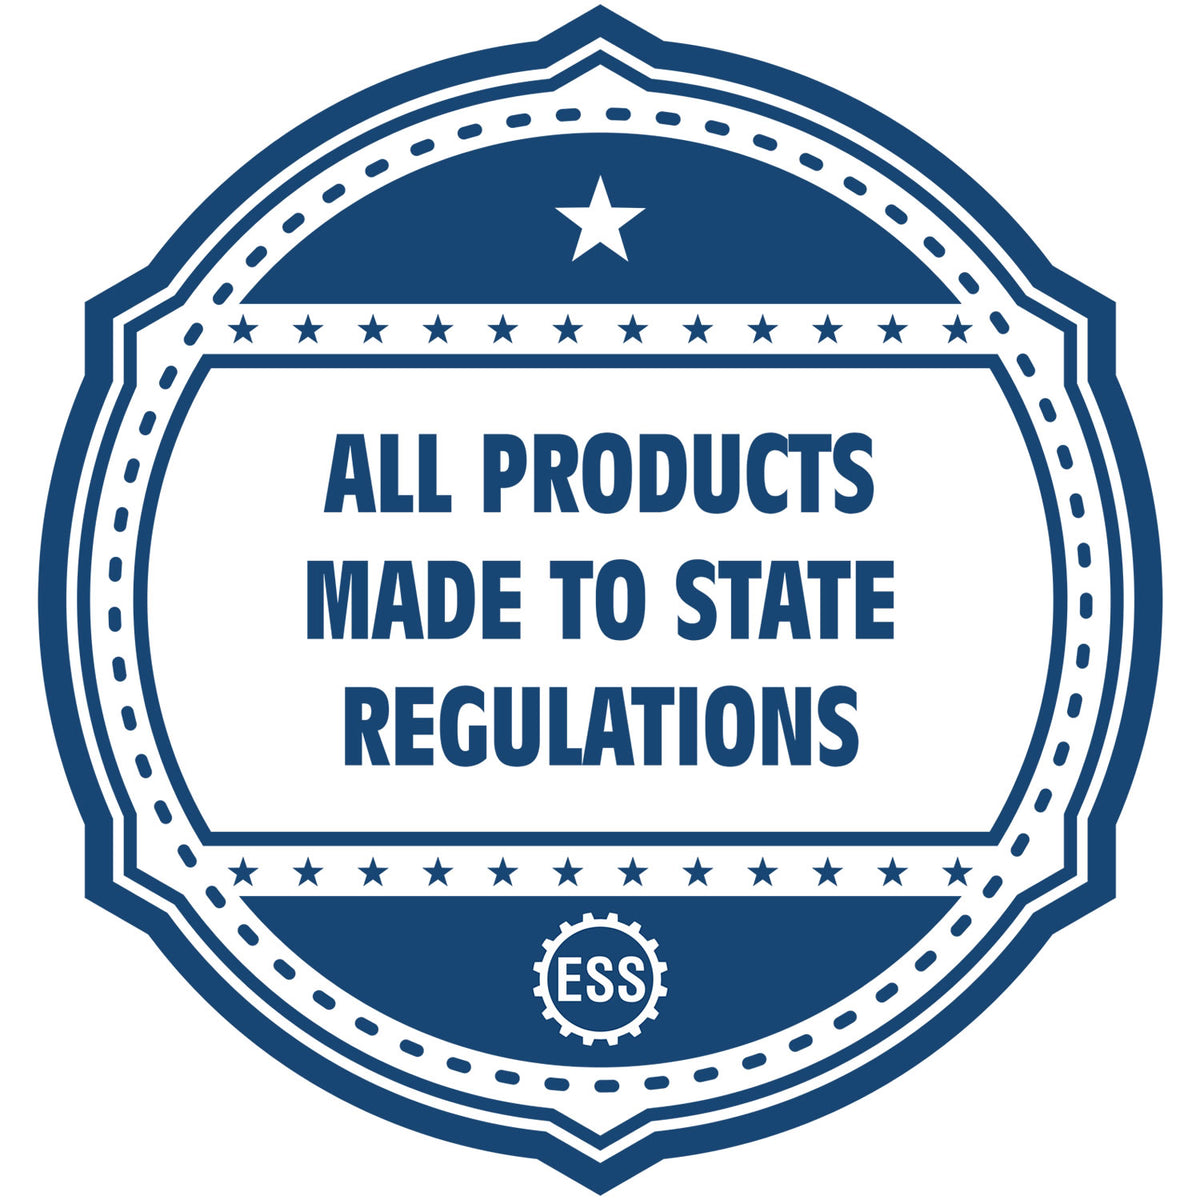 An icon or badge element for the State of Maryland Architectural Seal Embosser showing that this product is made in compliance with state regulations.